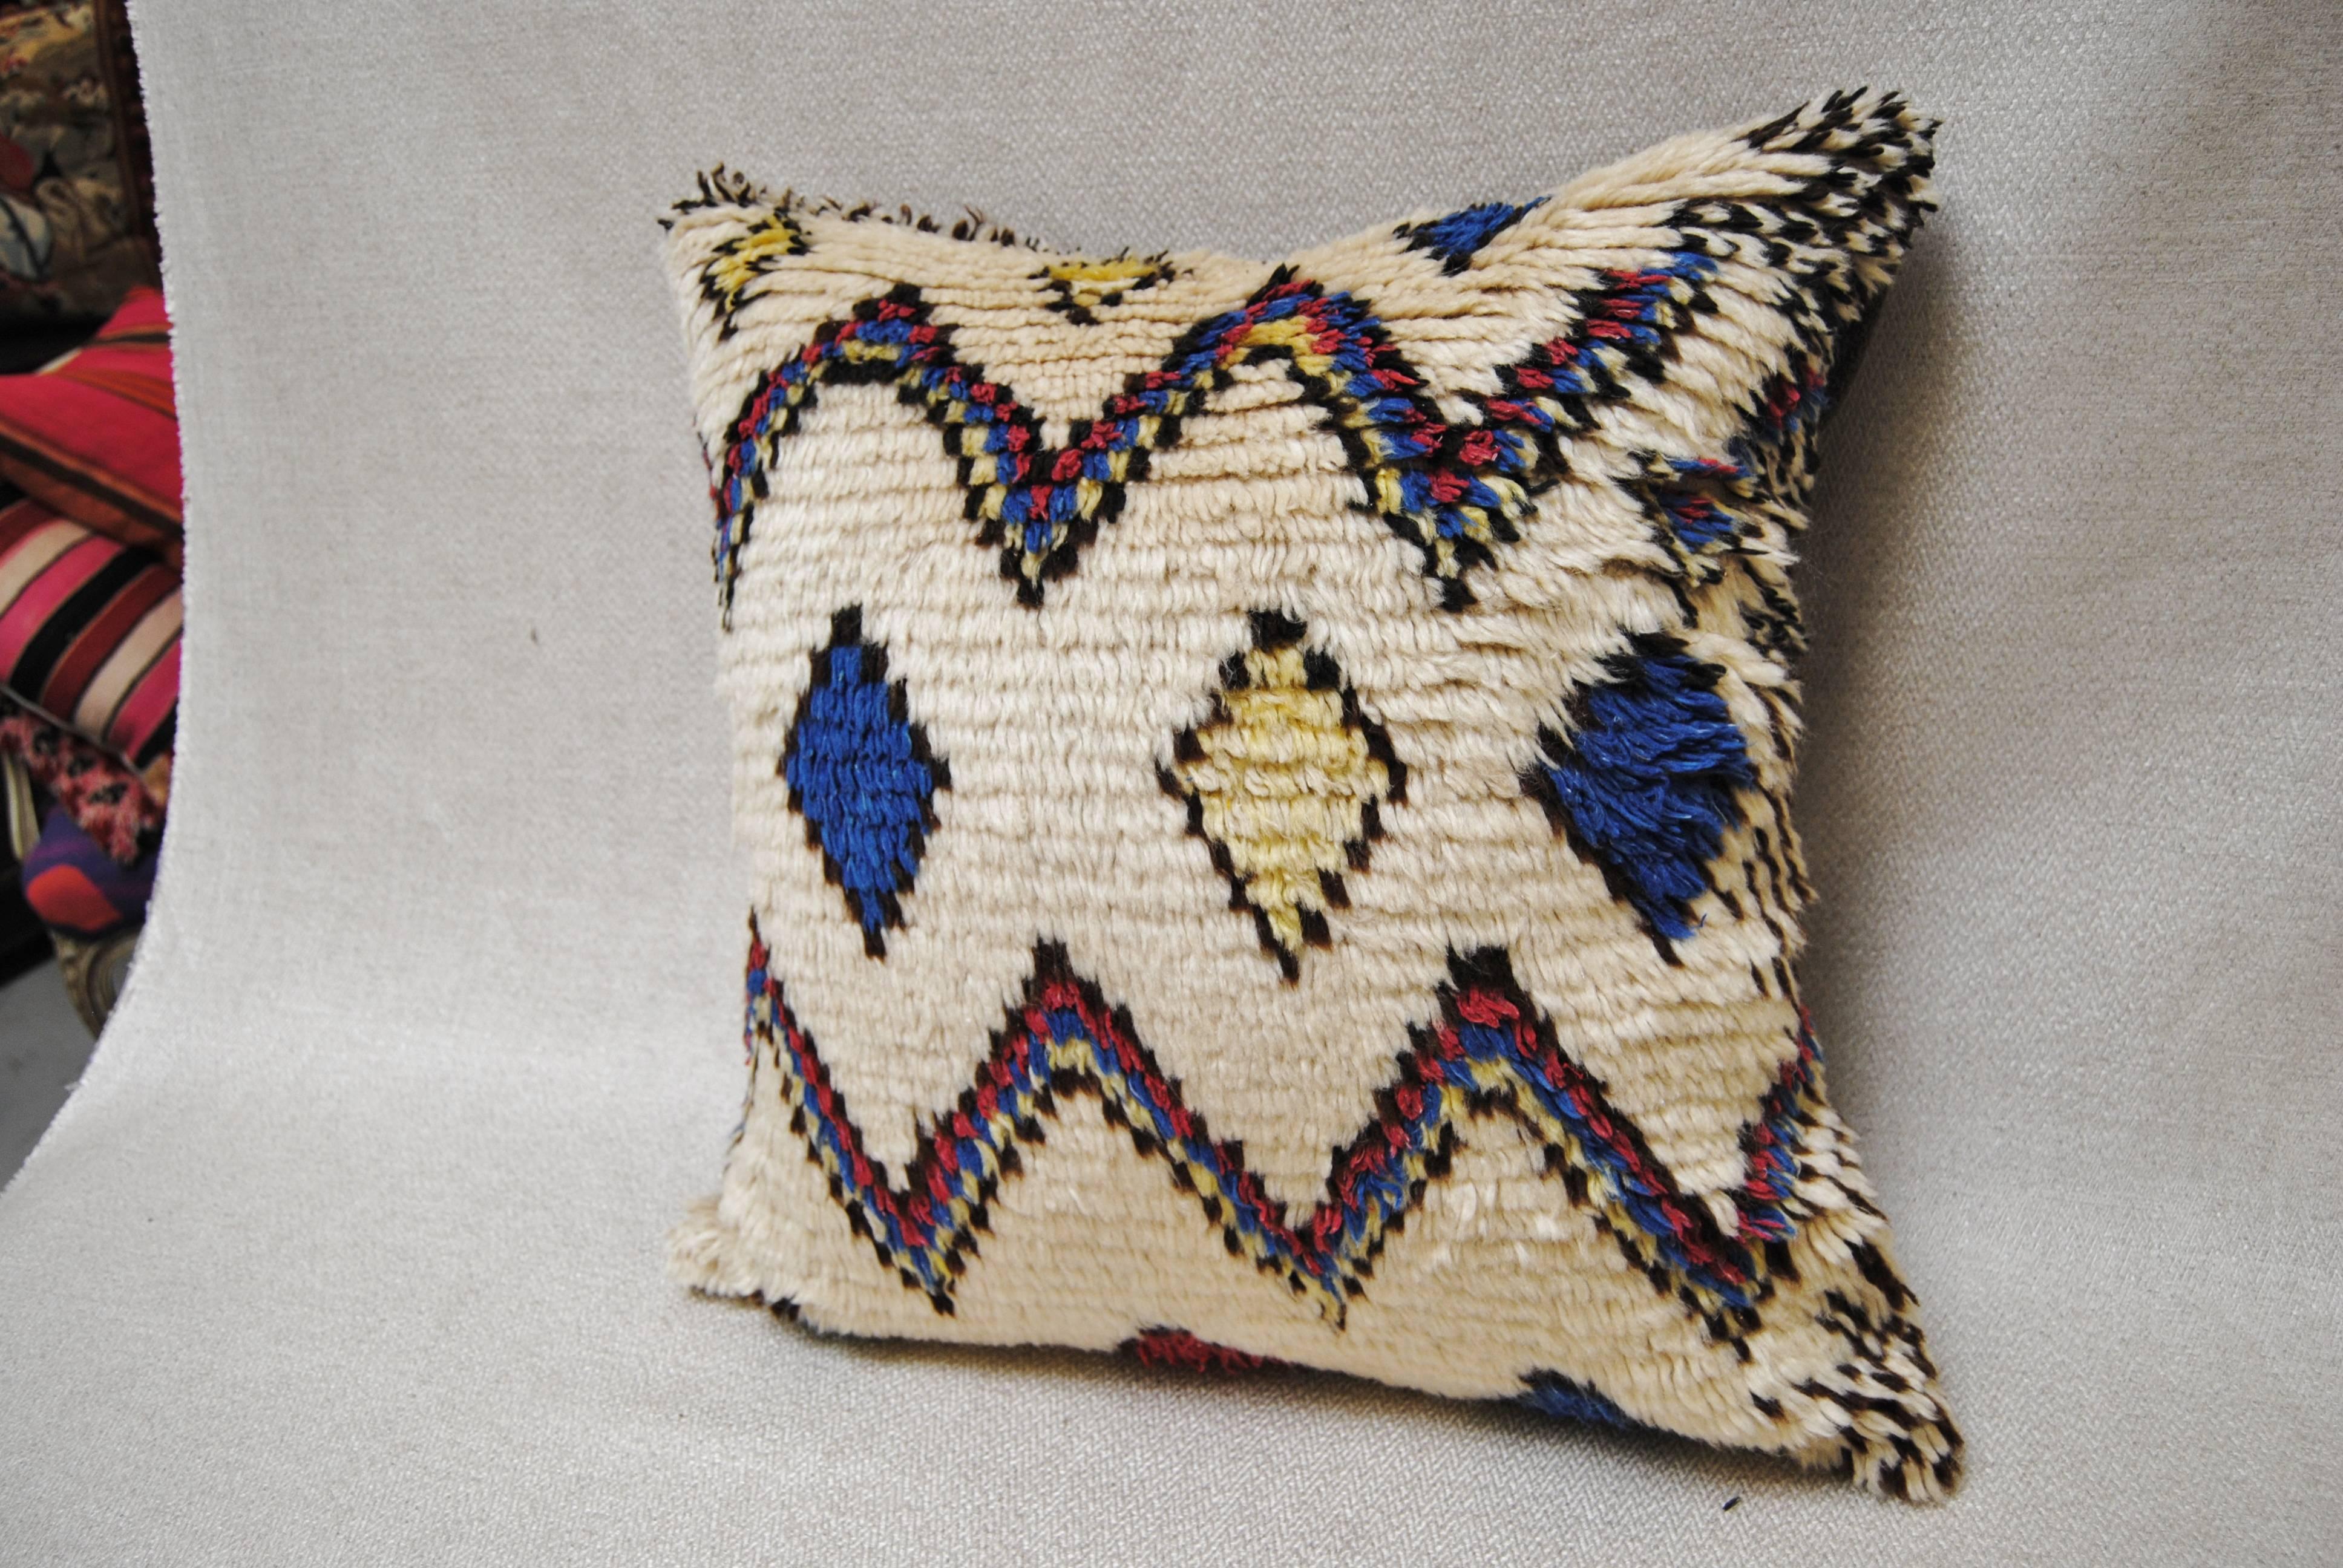 Custom pillow cut from a vintage Moroccan hand-loomed wool Azilal rug made by the Berbers of the Atlas Mountains. Soft lustrous wool with all natural dyes. Pillow is backed in a cream mohair, filled with an insert of 50/50 down and feathers and